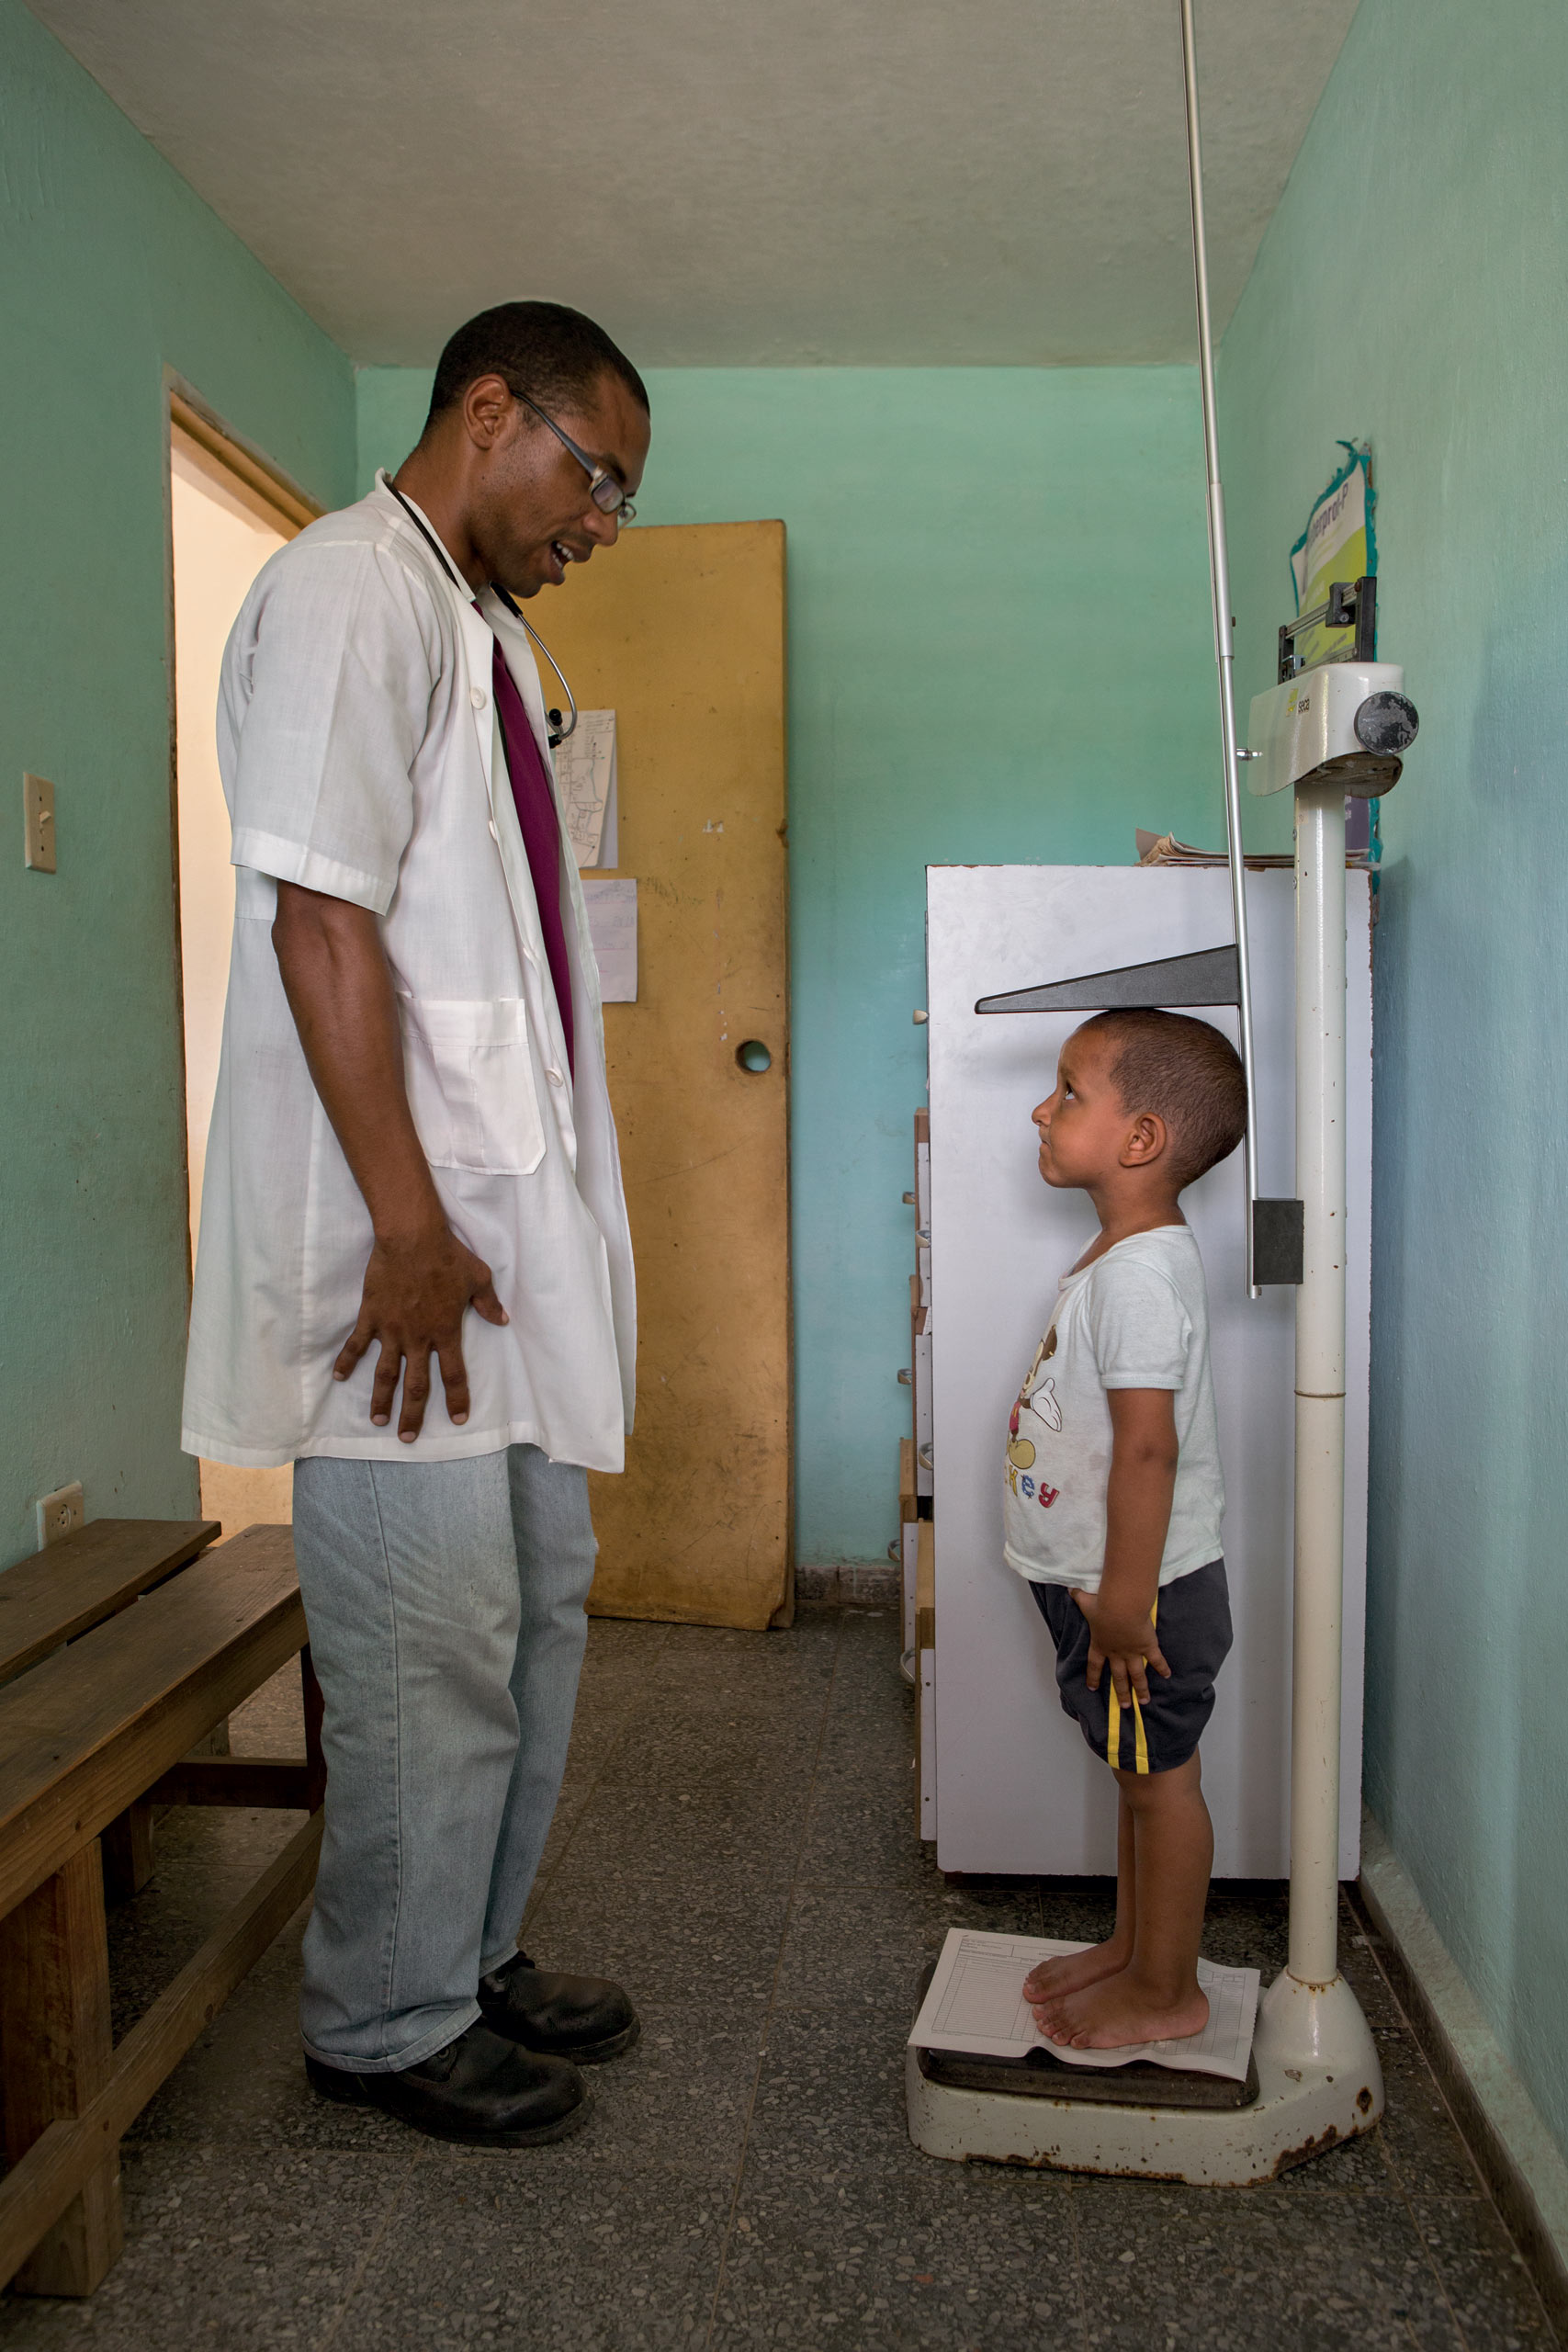 Dr. Rodriguez provides primary care to Shexley Benent, 2, at walk-in clinic Number 14 at La Santa Fe, Isle of Youth, Cuba.